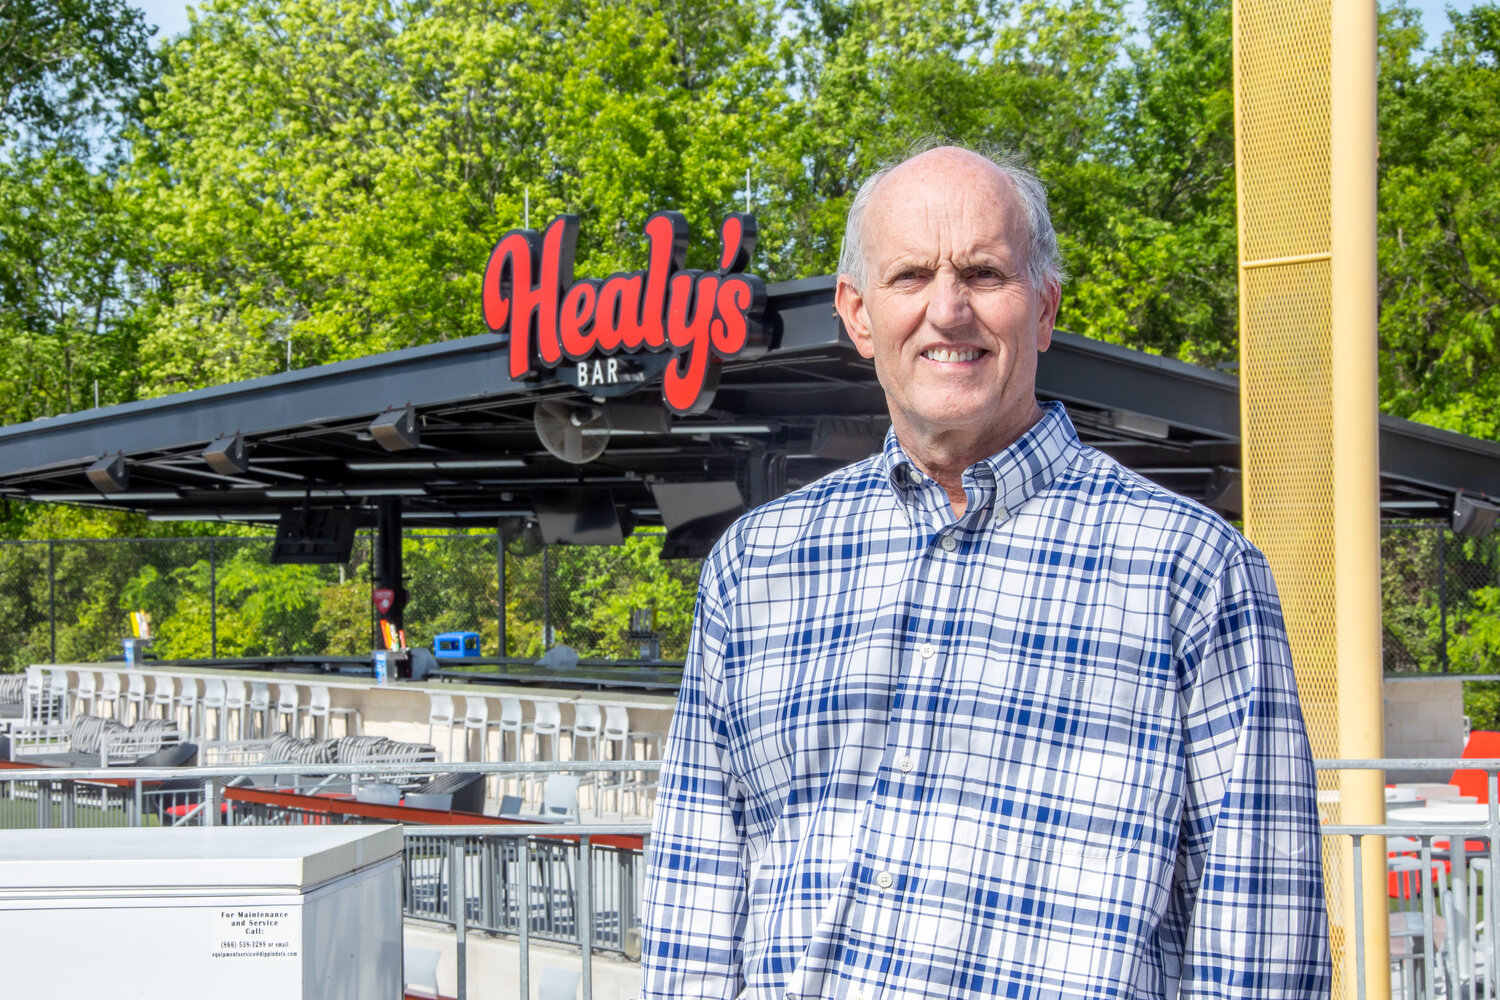 Mac Healy’s work ethic comes with many valuable attributes, his friends say. They tout his leadership style, business acumen, and his optimistic and persistent doggedness when pursuing a project.